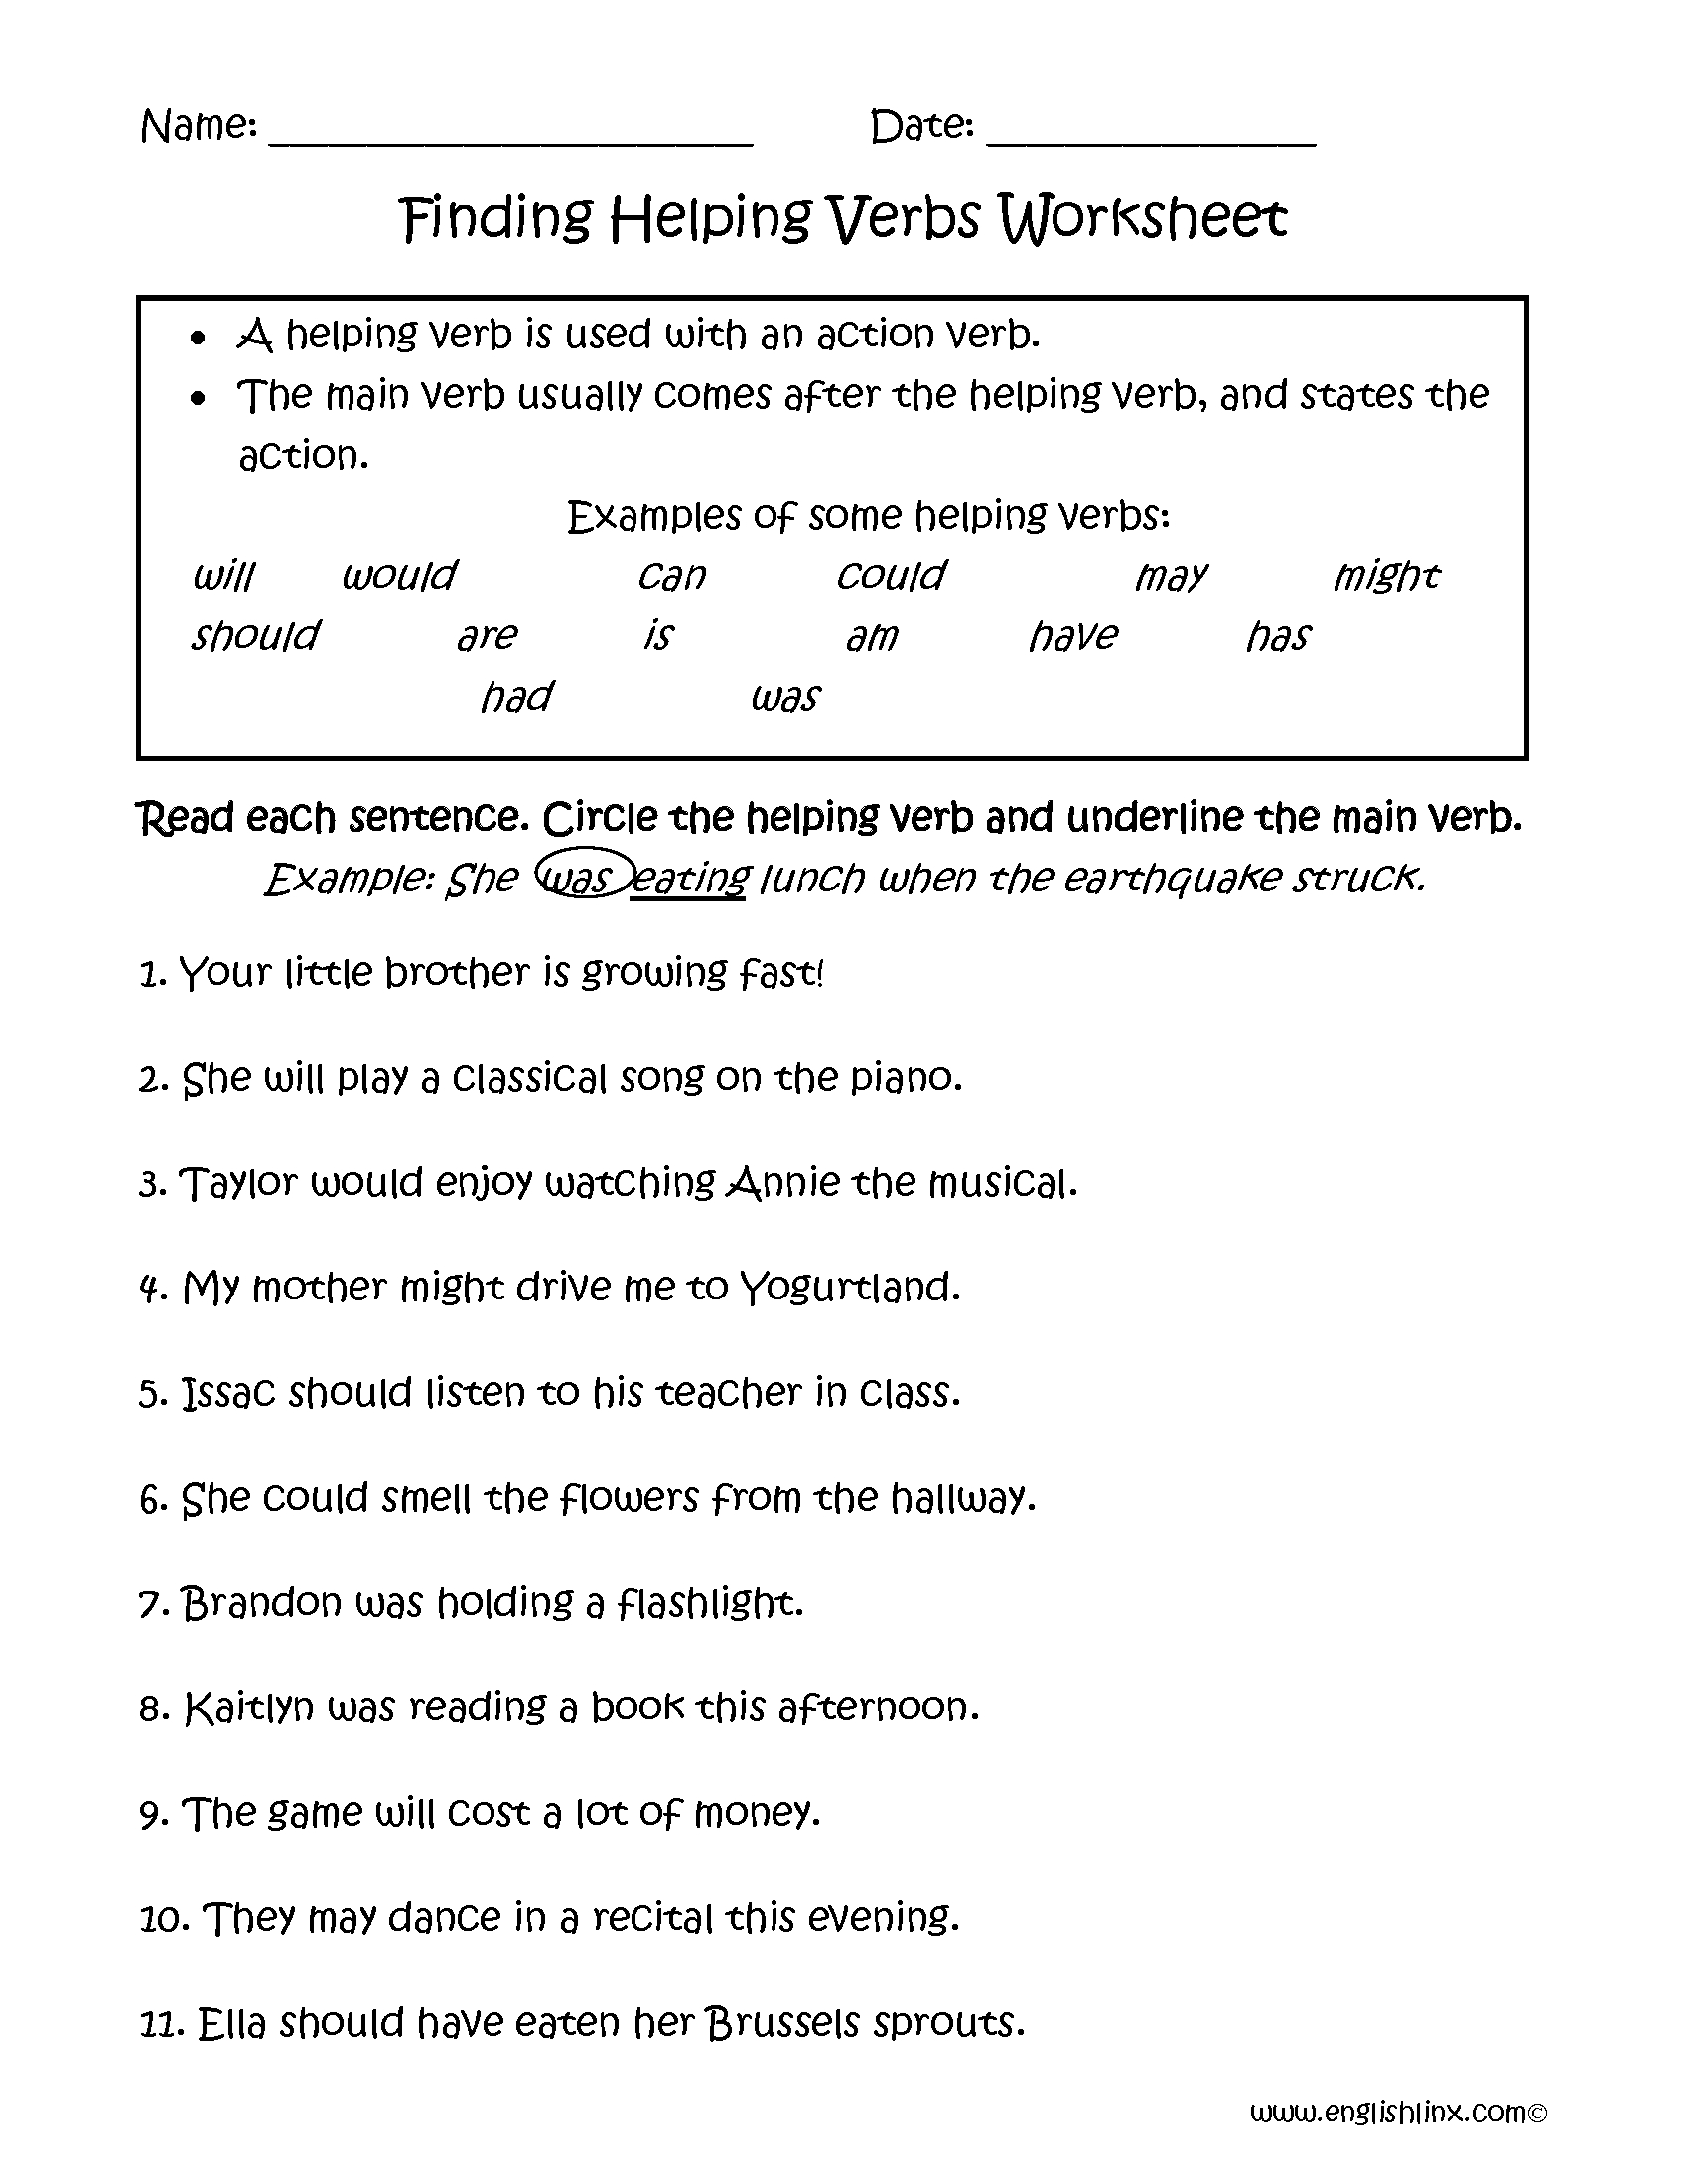 printable-verb-worksheets-from-k5learning-verb-worksheets-grammar-worksheets-2nd-grade